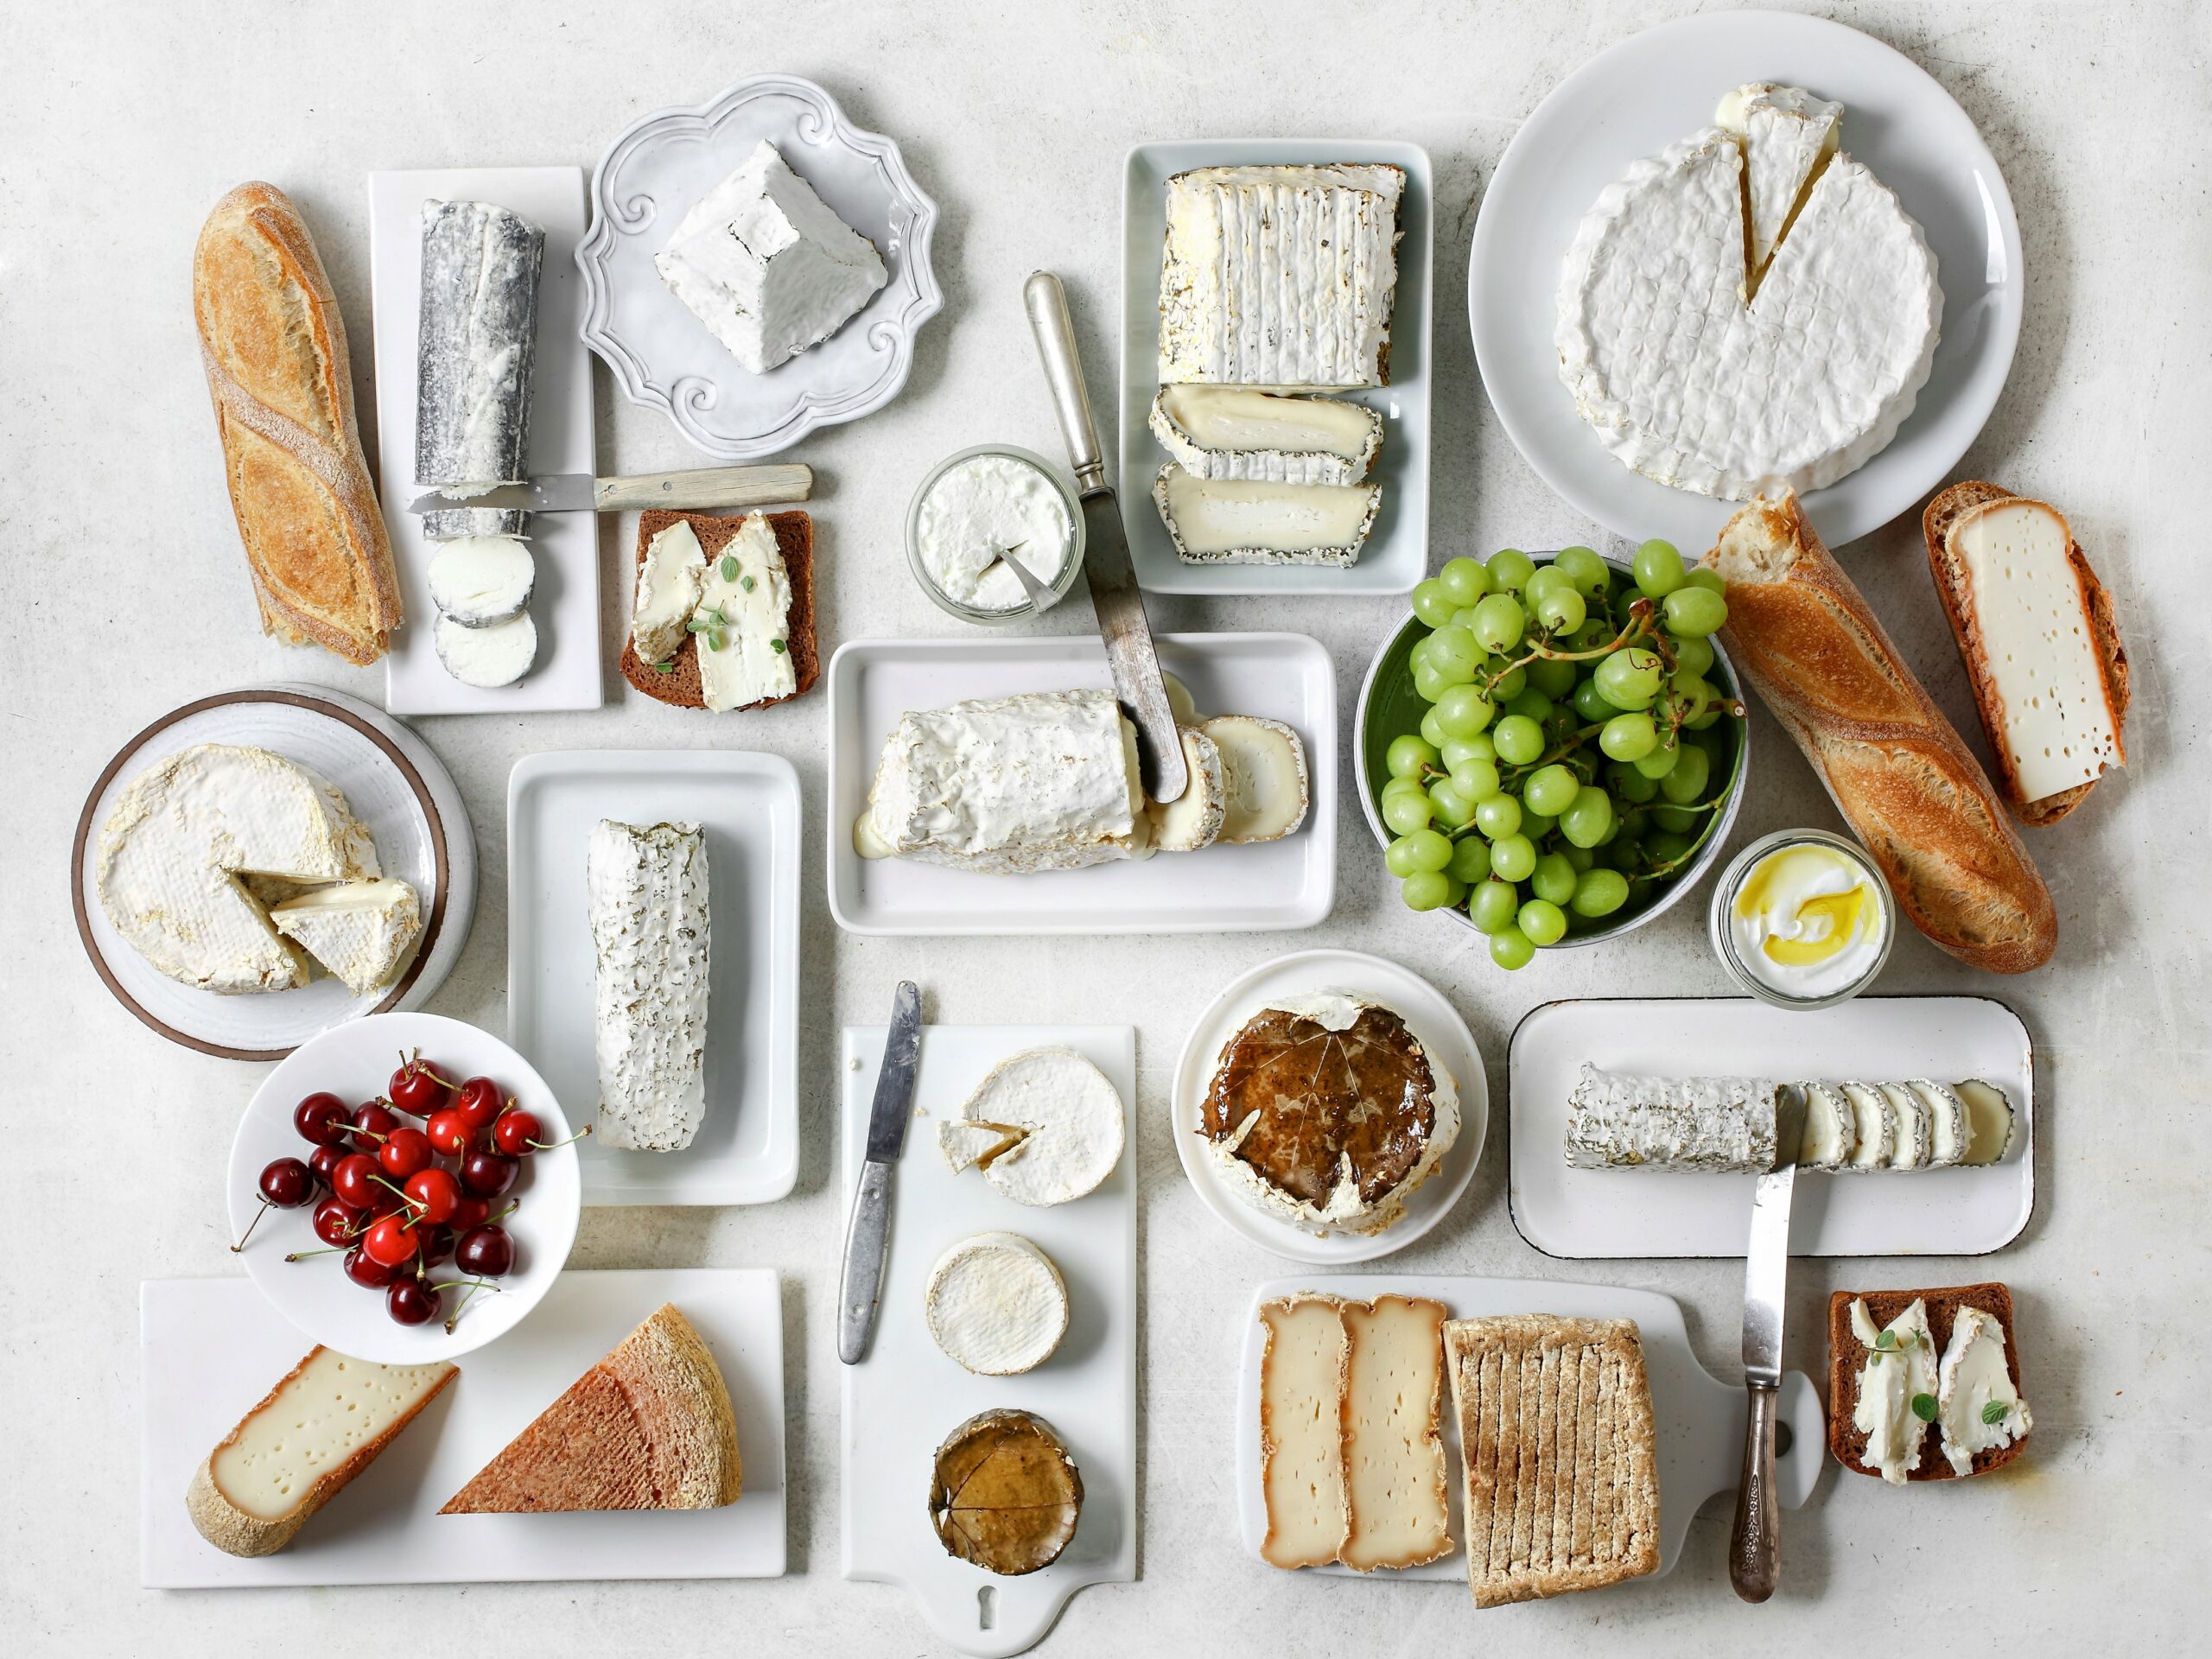 Spread of cheese, fruit, and bread